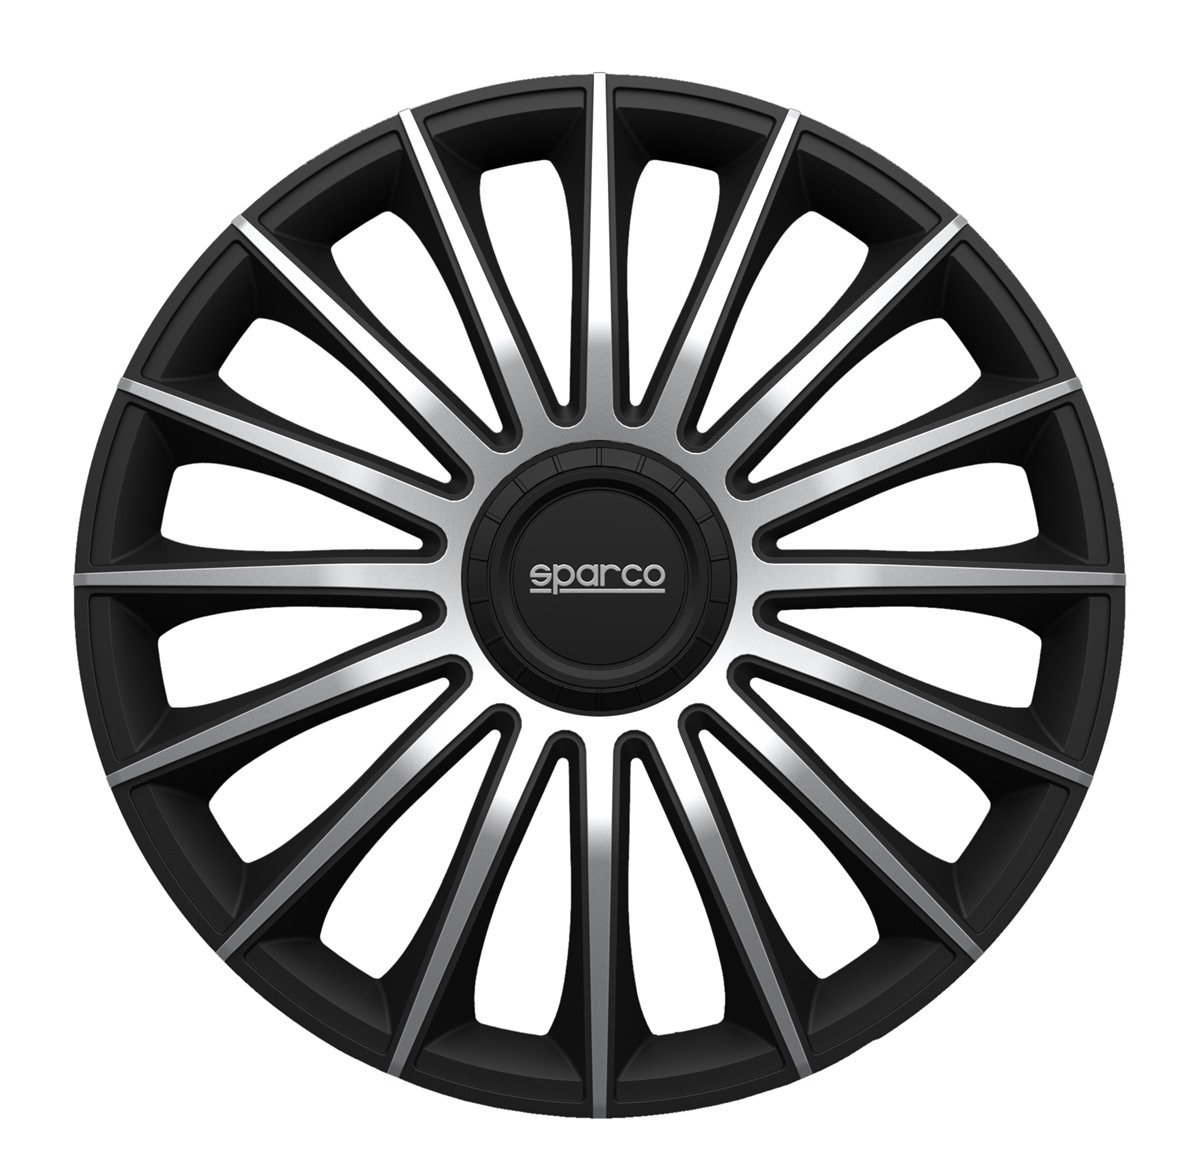 Wheel covers Treviso 16 black-silver 4pcs Sparco